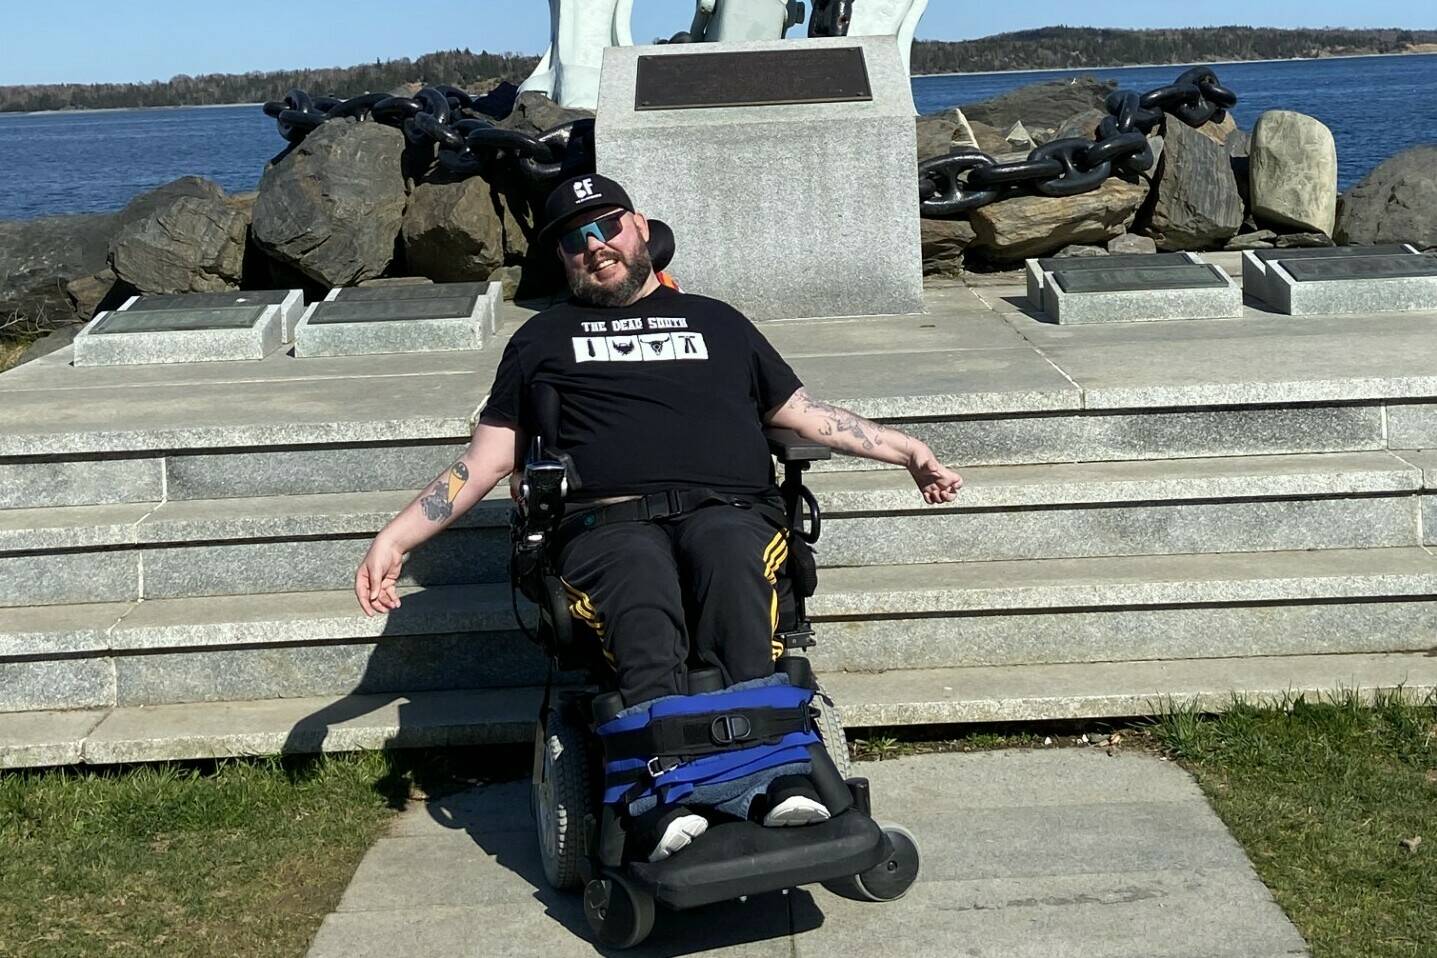 White Rock resident Ryan Lachance – shown here in Halifax – is also a comedian who travels for his shows. He says Air Canada crew dropped him on his last 2 flights. (Contributed photo)